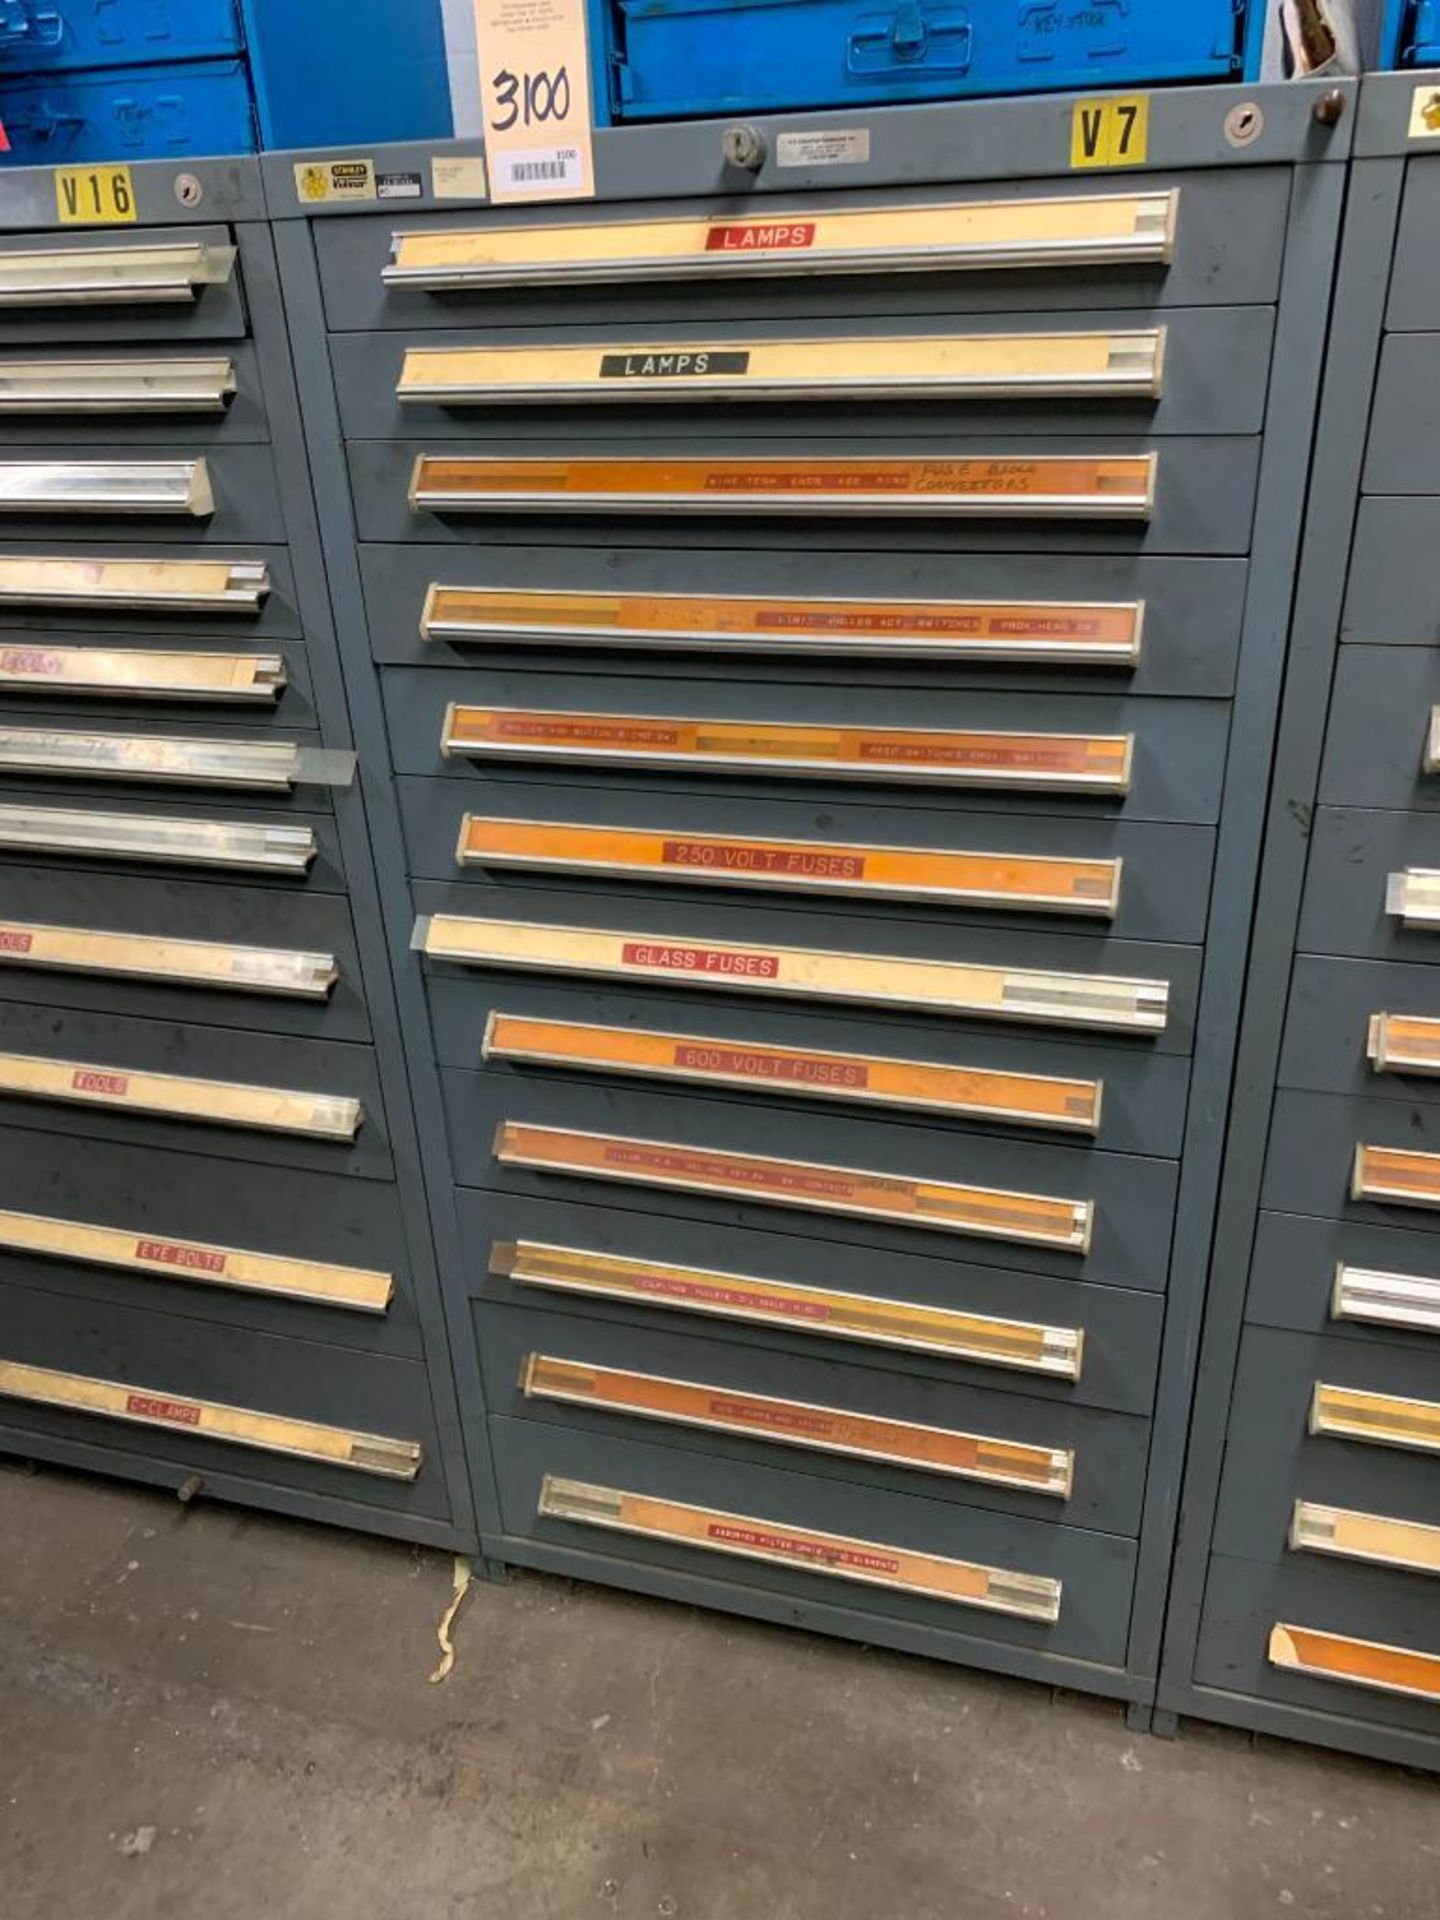 Vidmar 12 Drawer Cabinet with Lamps, Fuses, Valves, Etc.